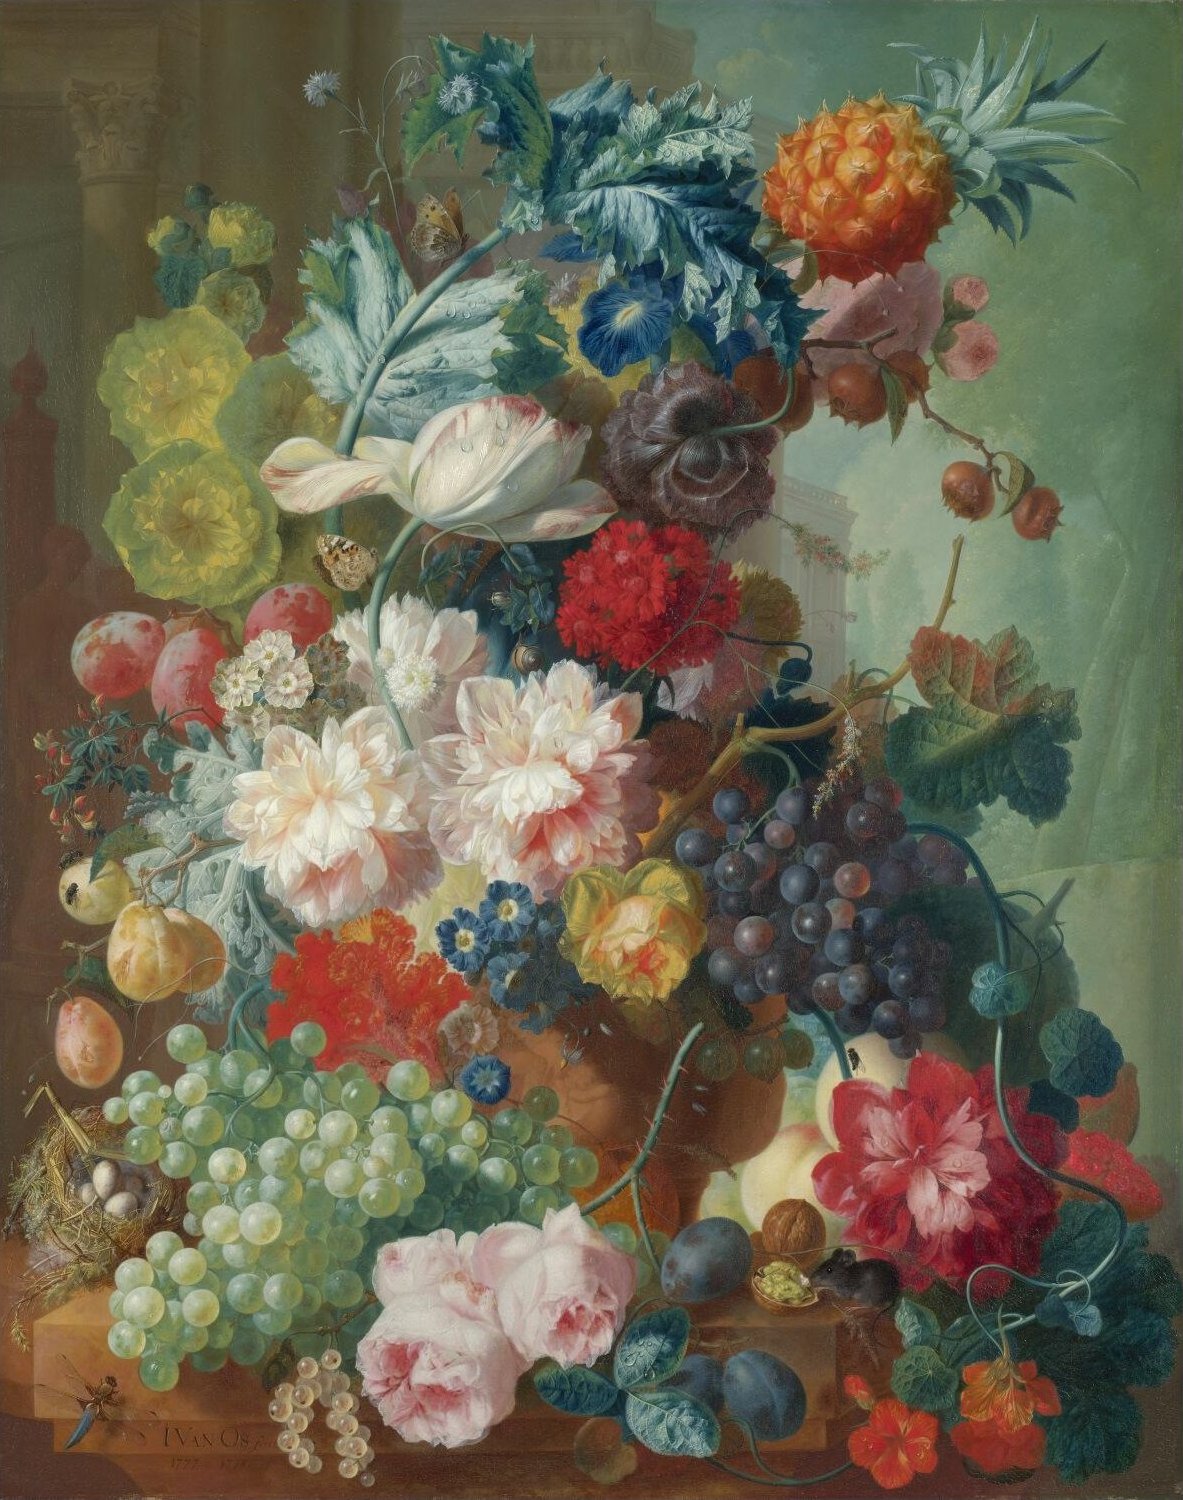 Flowers in a Terracotta Vase by Jan Huysum - 1736-7 - 133.5 x 91.5 cm National Gallery